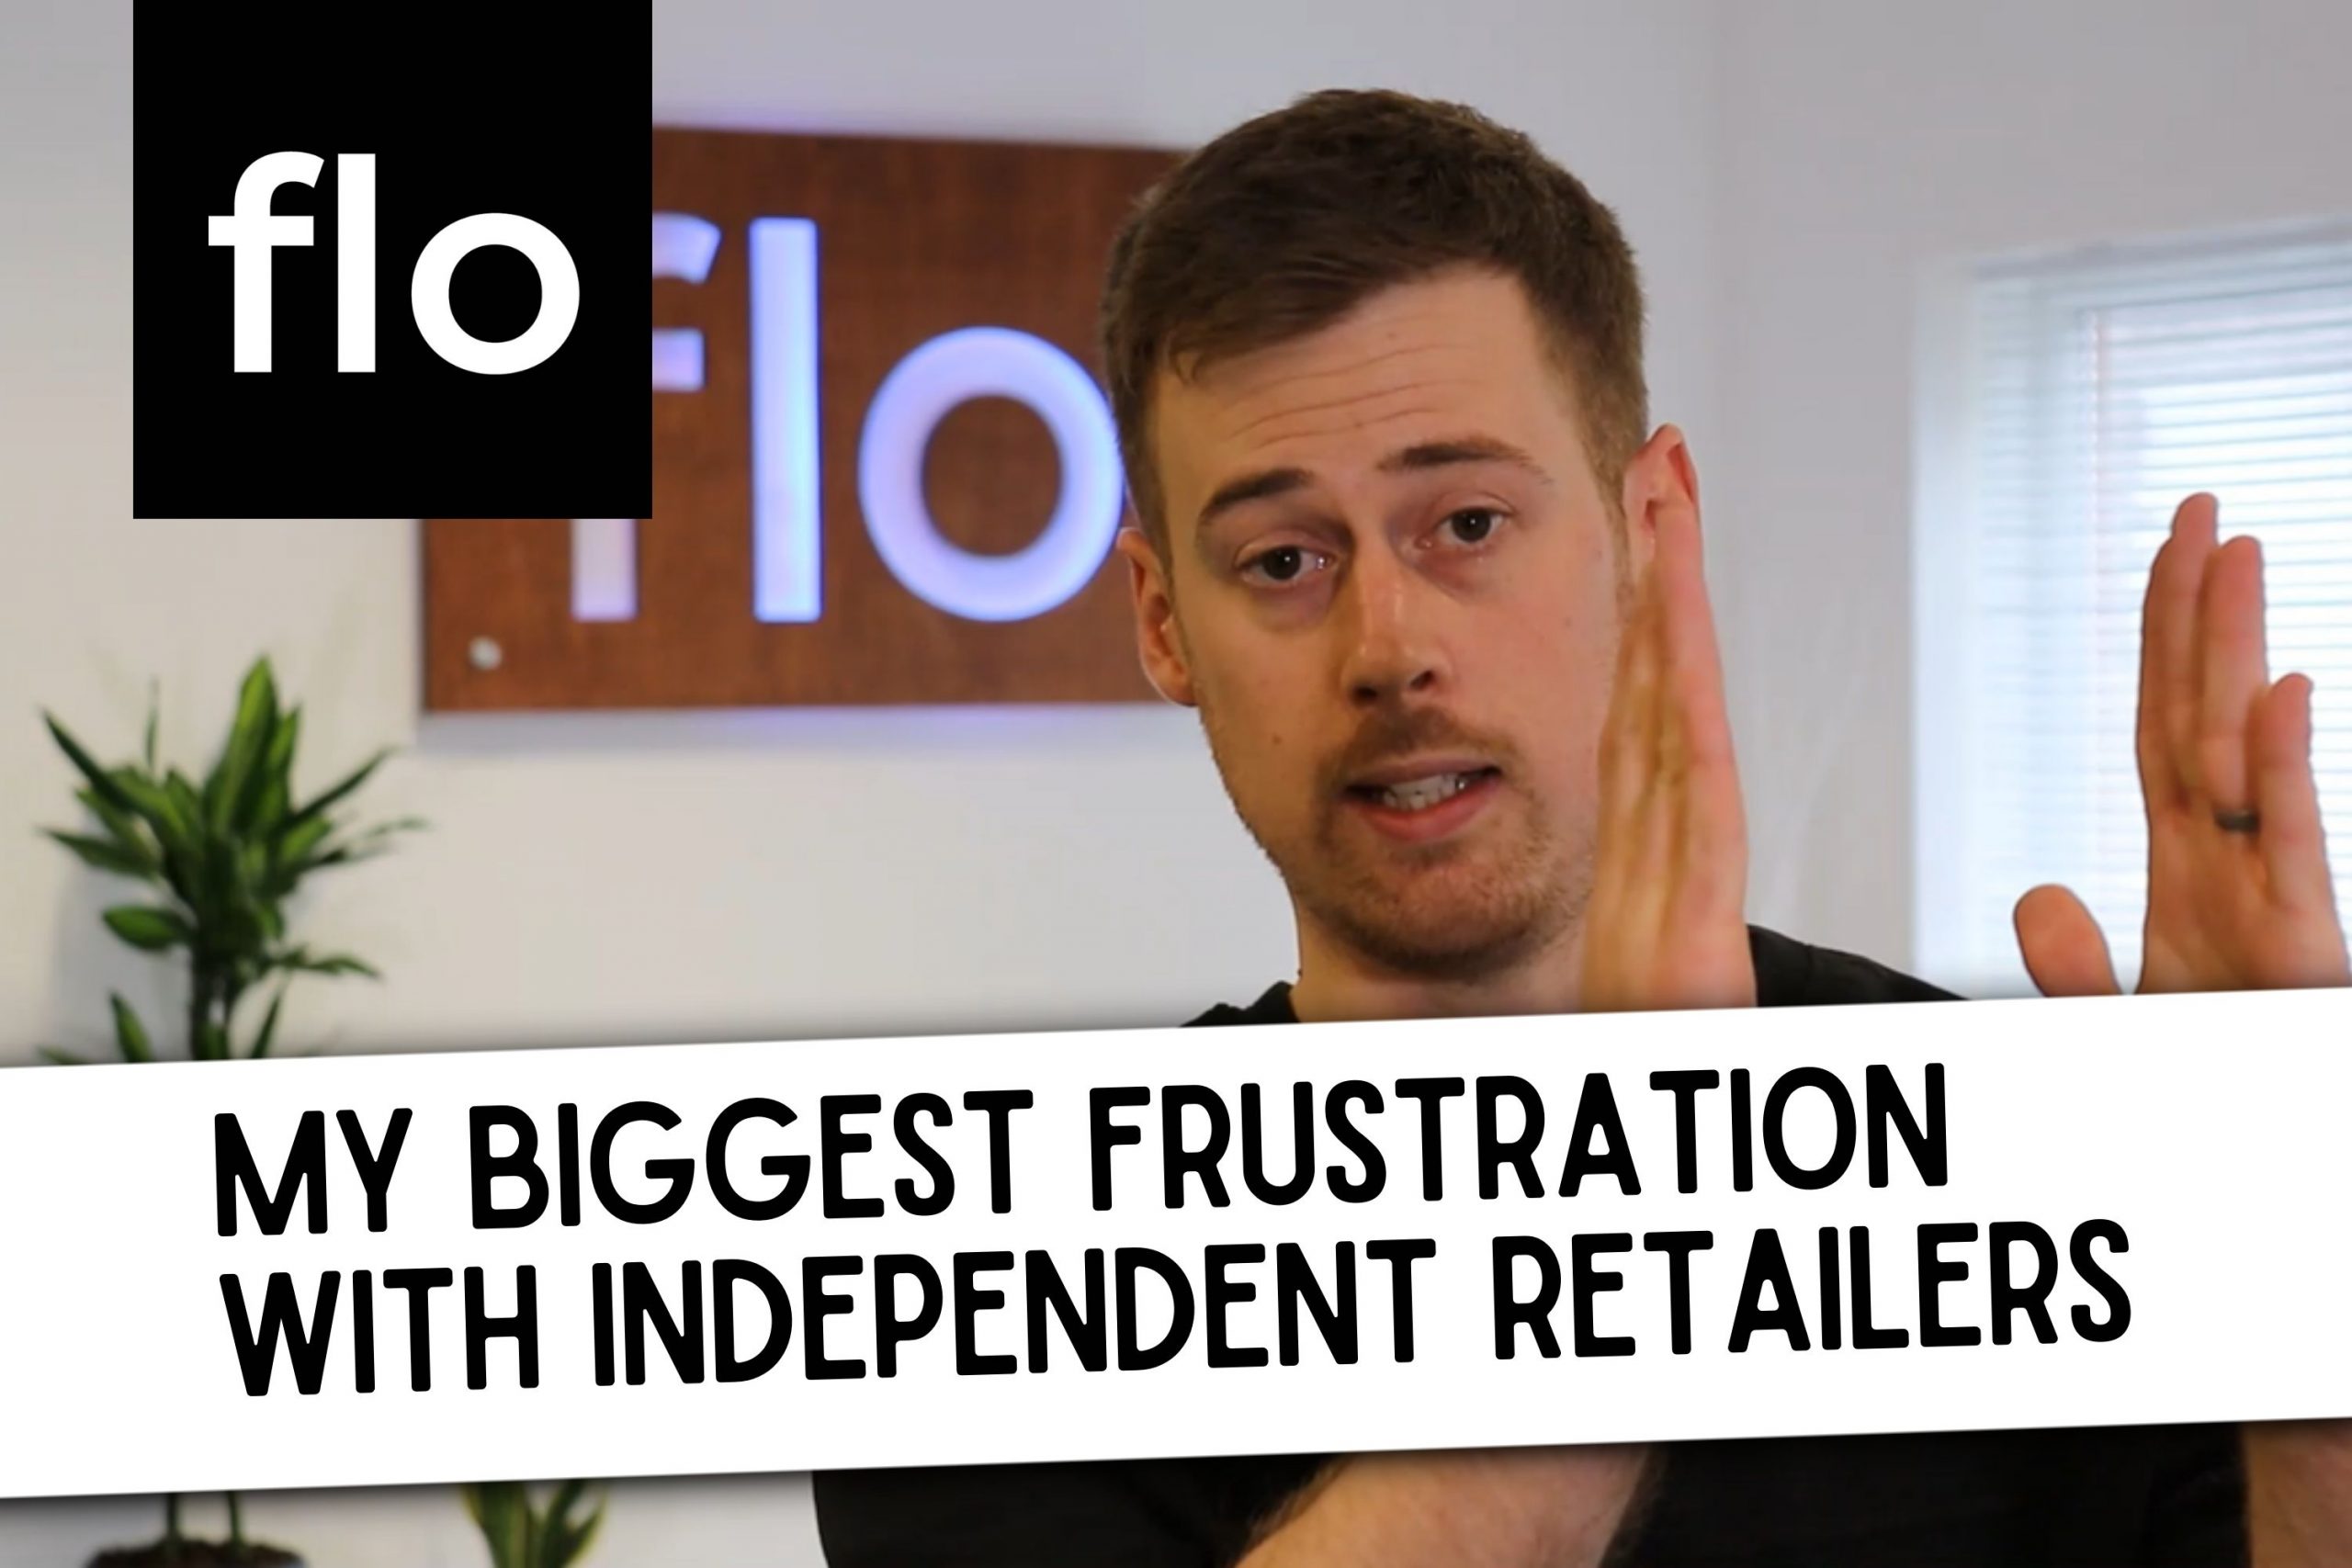 Video: My biggest frustration with independent retailers